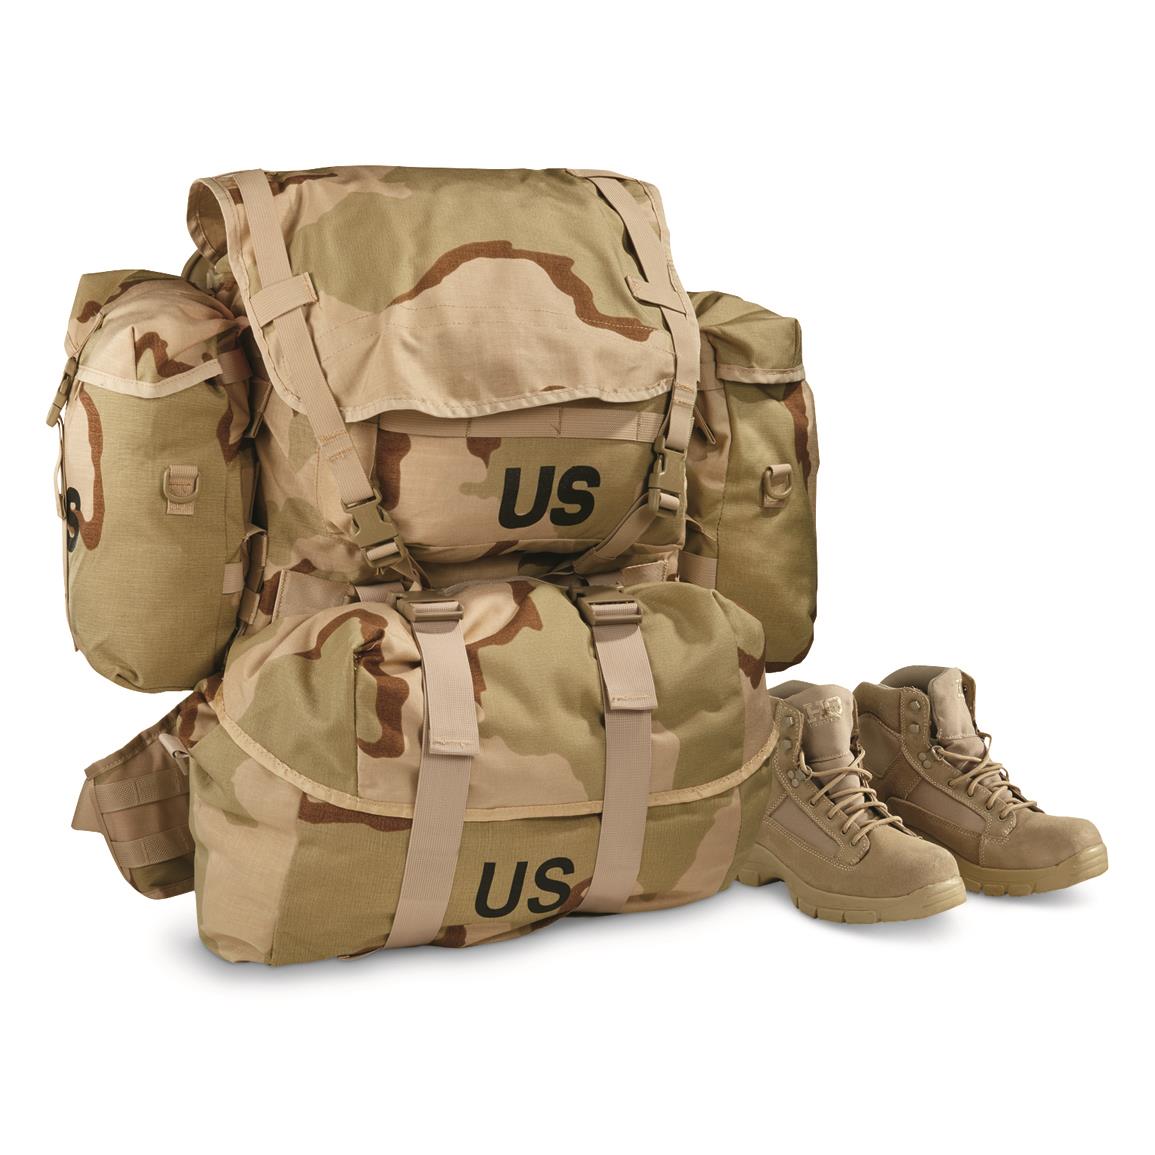 U.S. Military Surplus Desert MOLLE Field Pack Complete with Frame, New, 3-color Desert